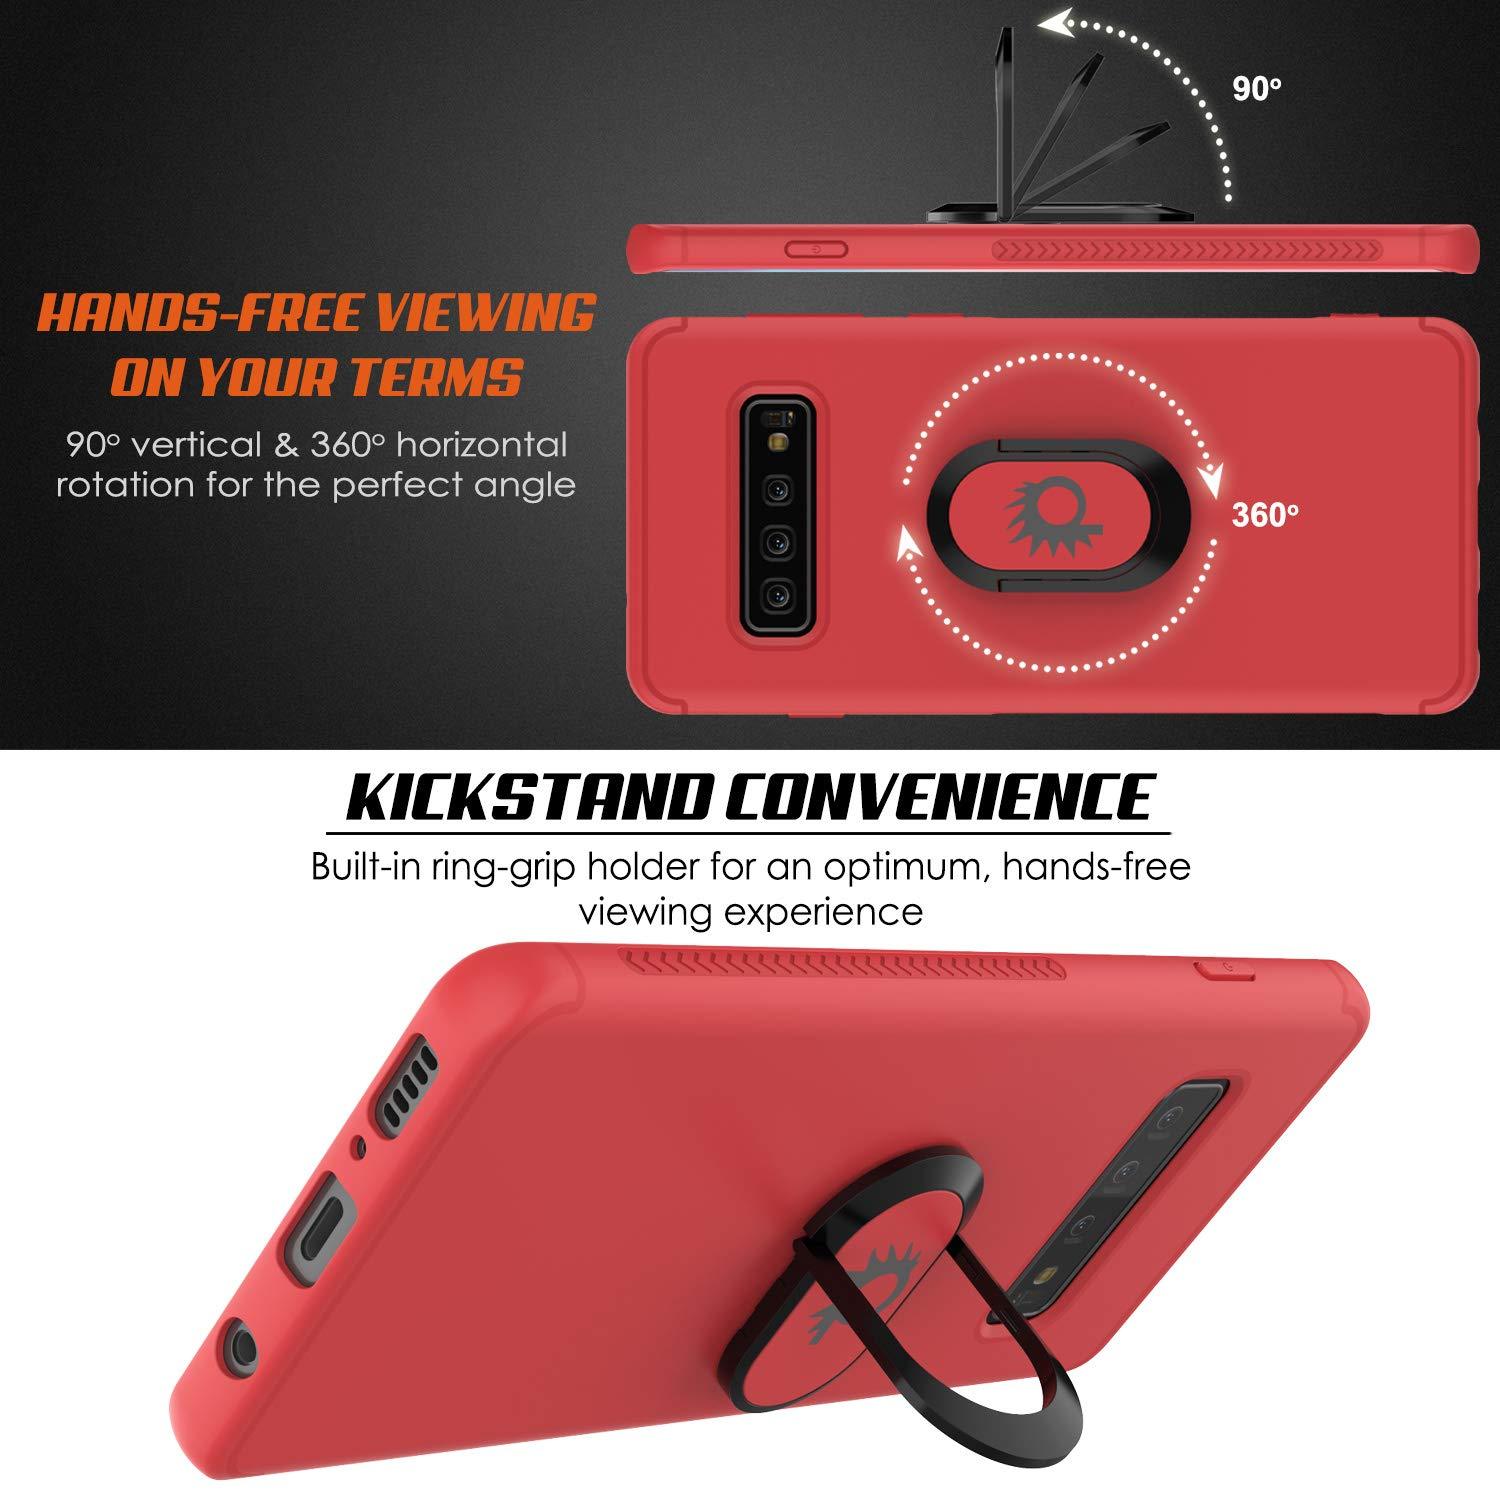 Galaxy S10 Case, Punkcase Magnetix Protective TPU Cover W/ Kickstand, Sceen Protector[Red]